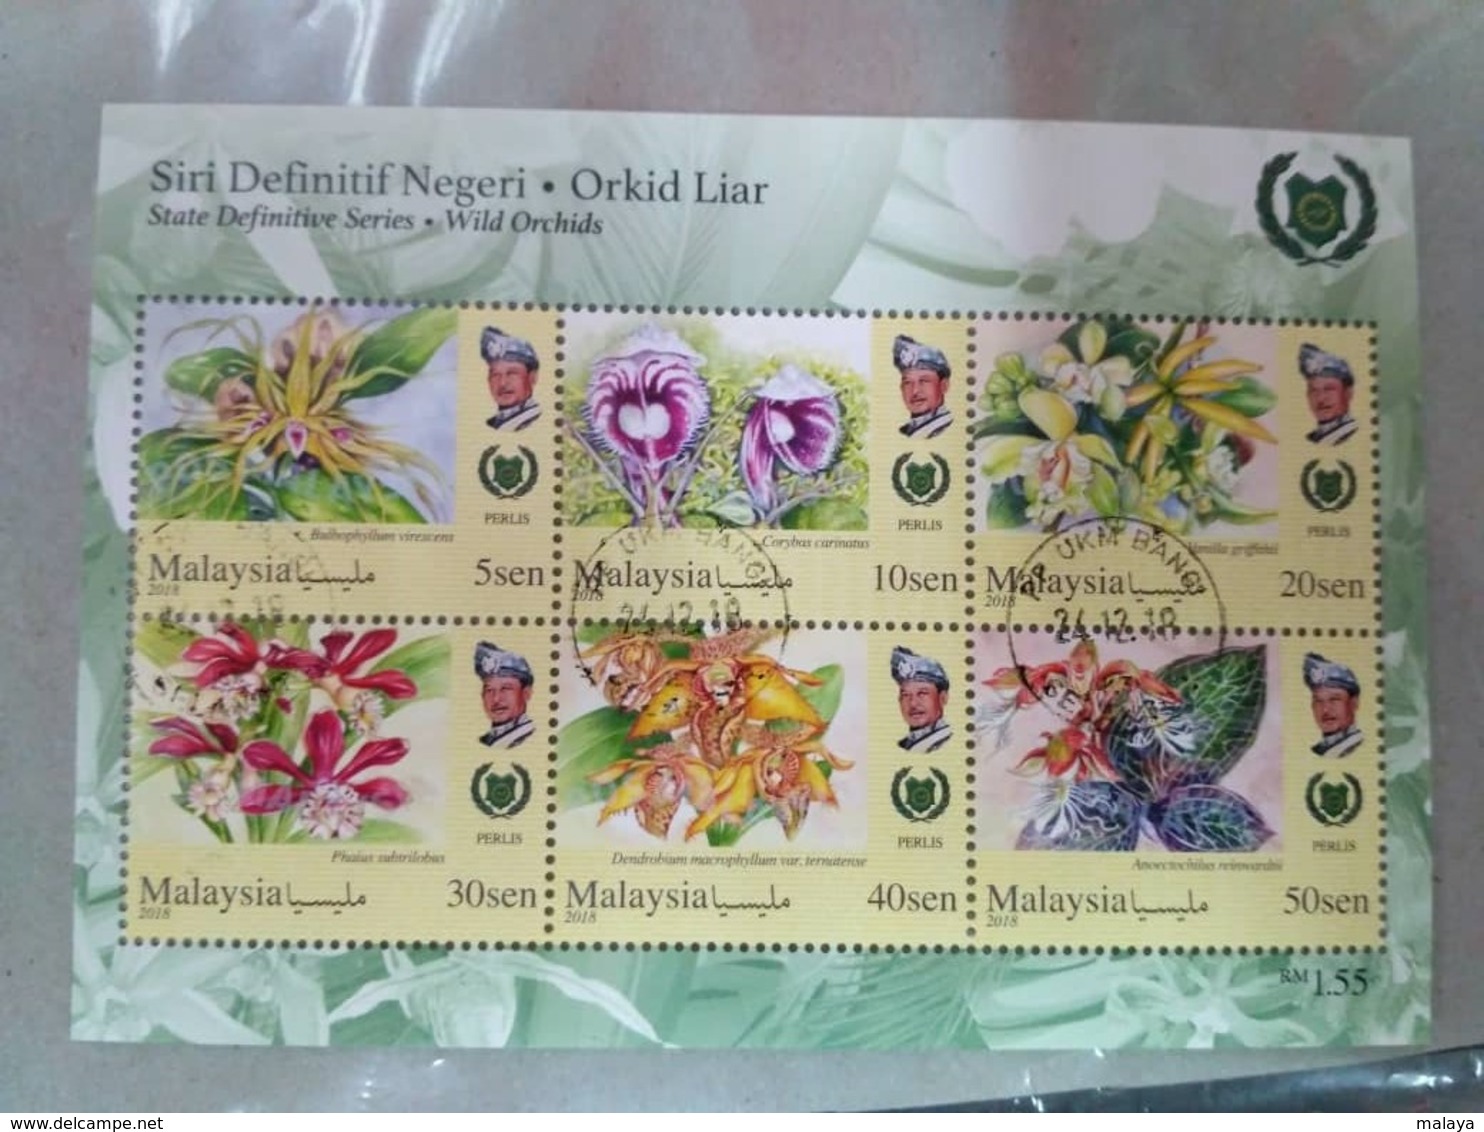 MALAYSIA 2018 WILD ORCHIDS definitive state series 14 MS stamps Perf Complete Sarawak Borneo Sabah Penang Perlis used